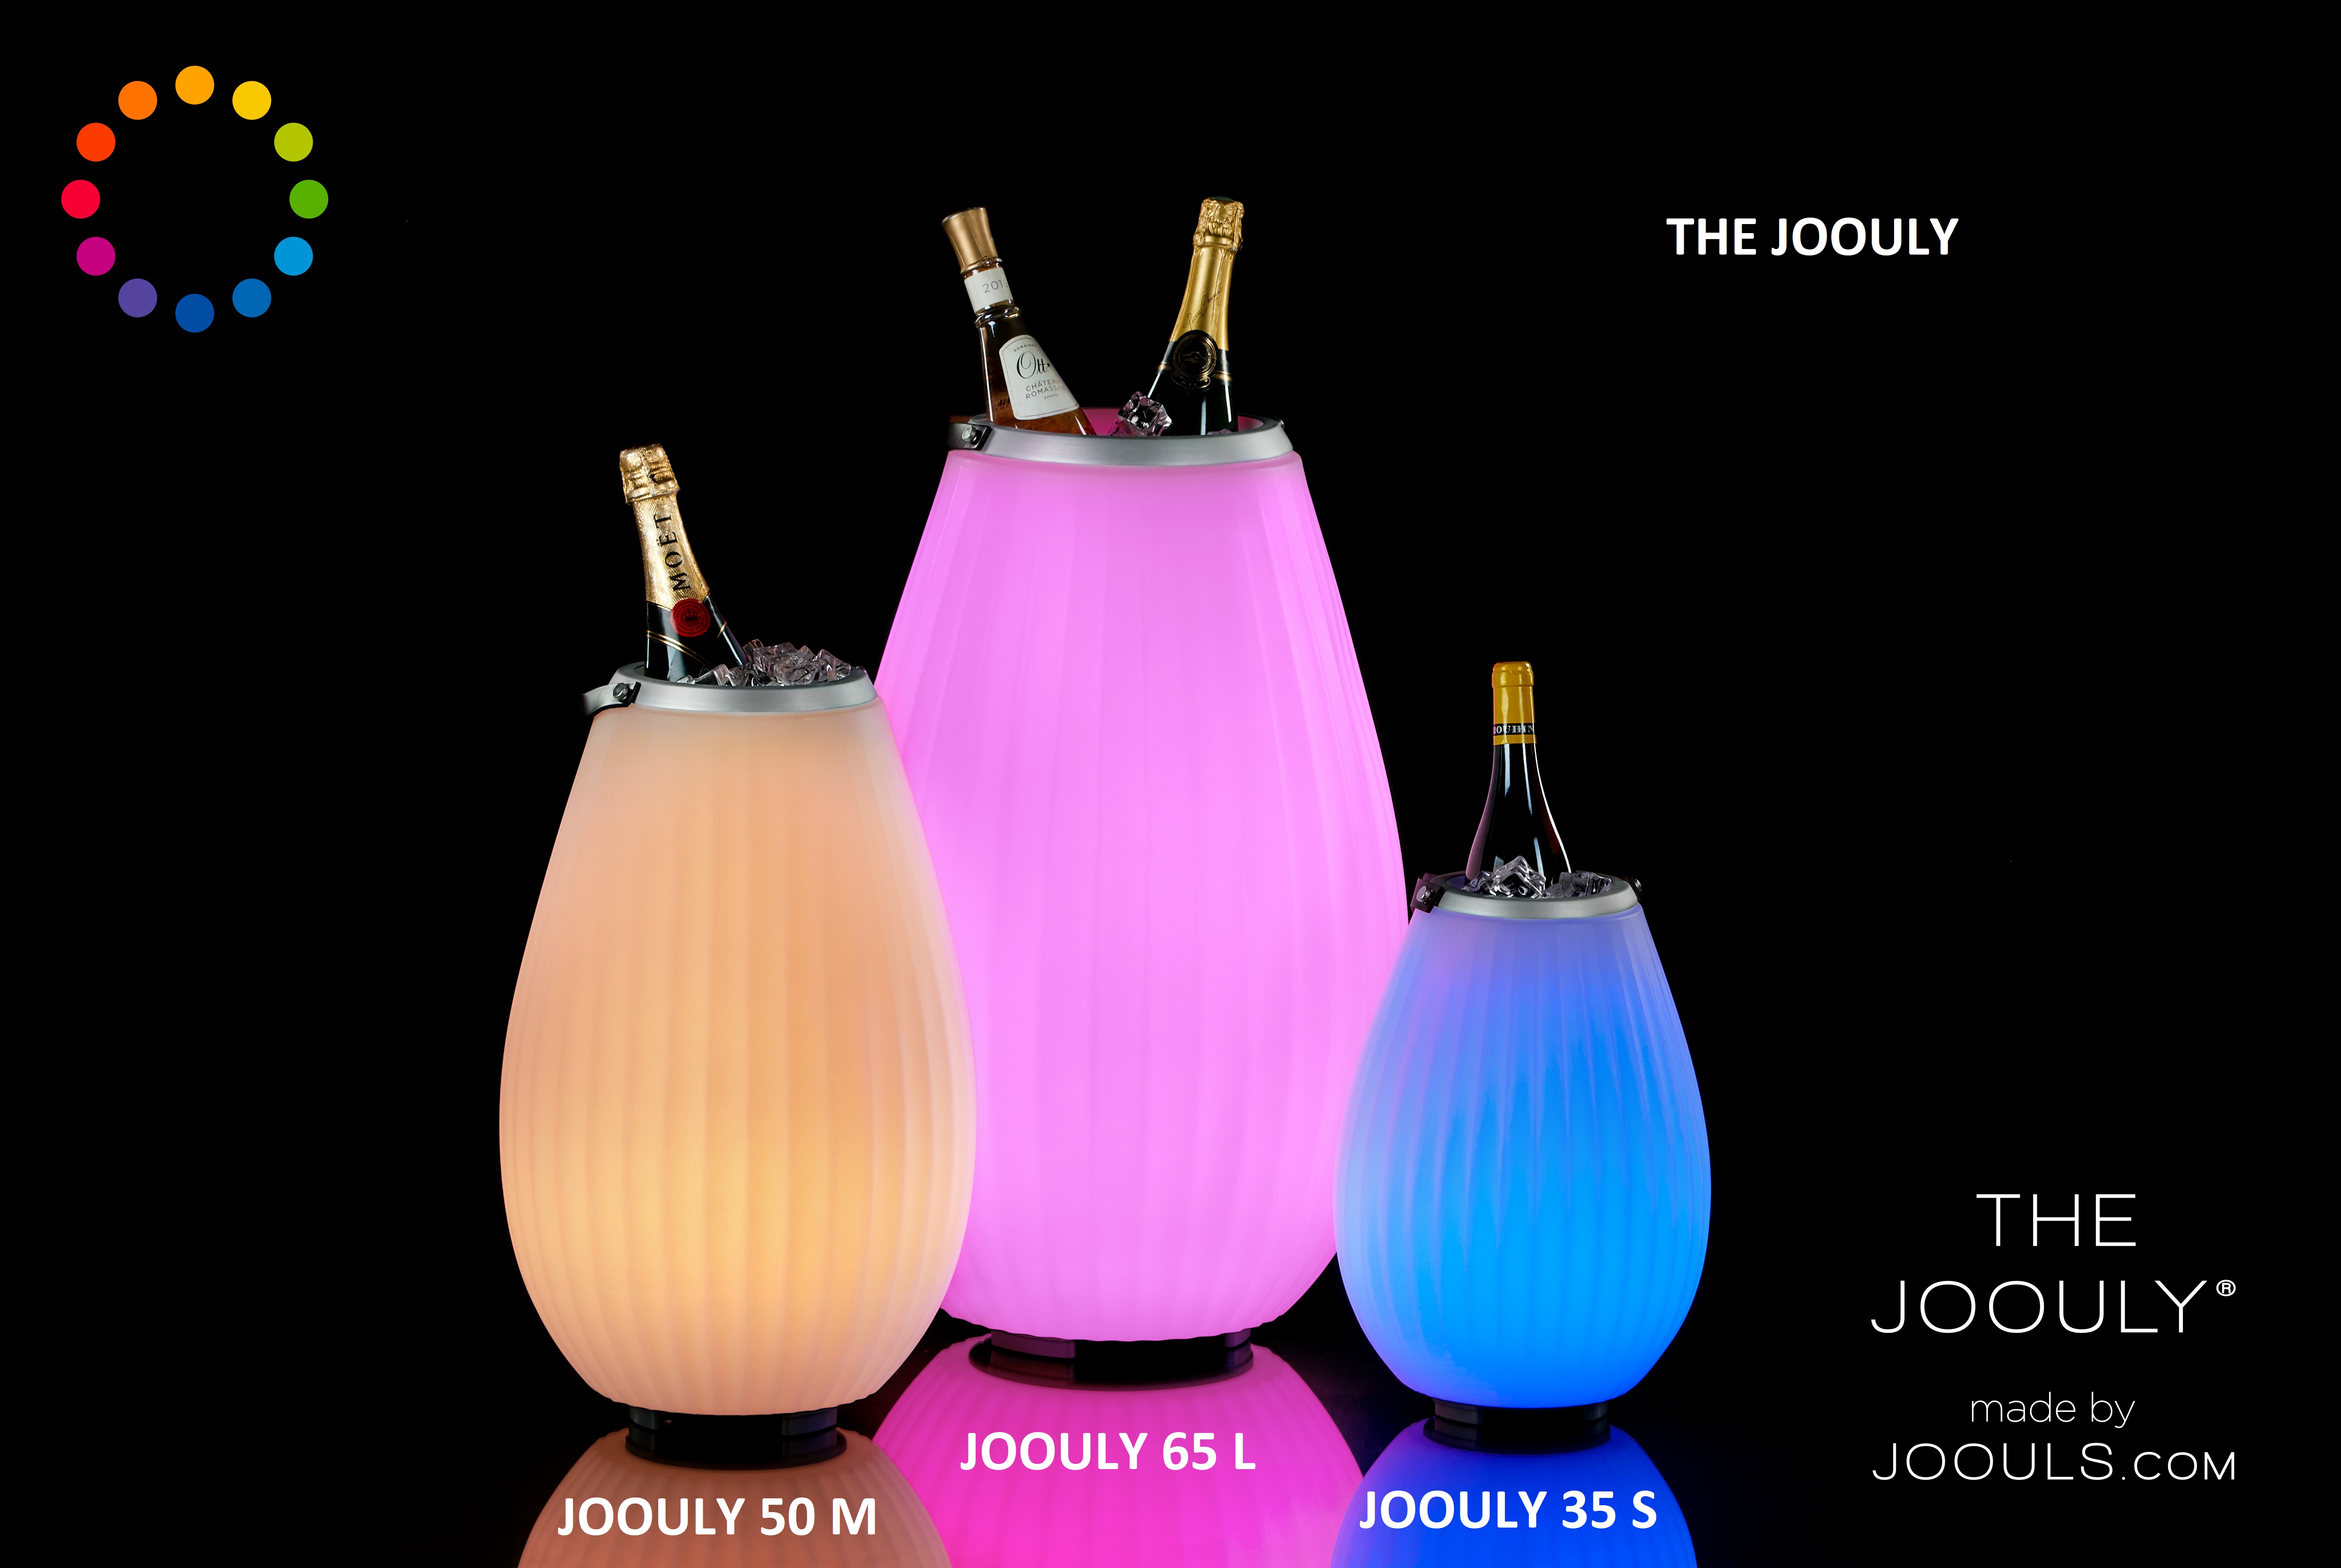 The Joouly 65